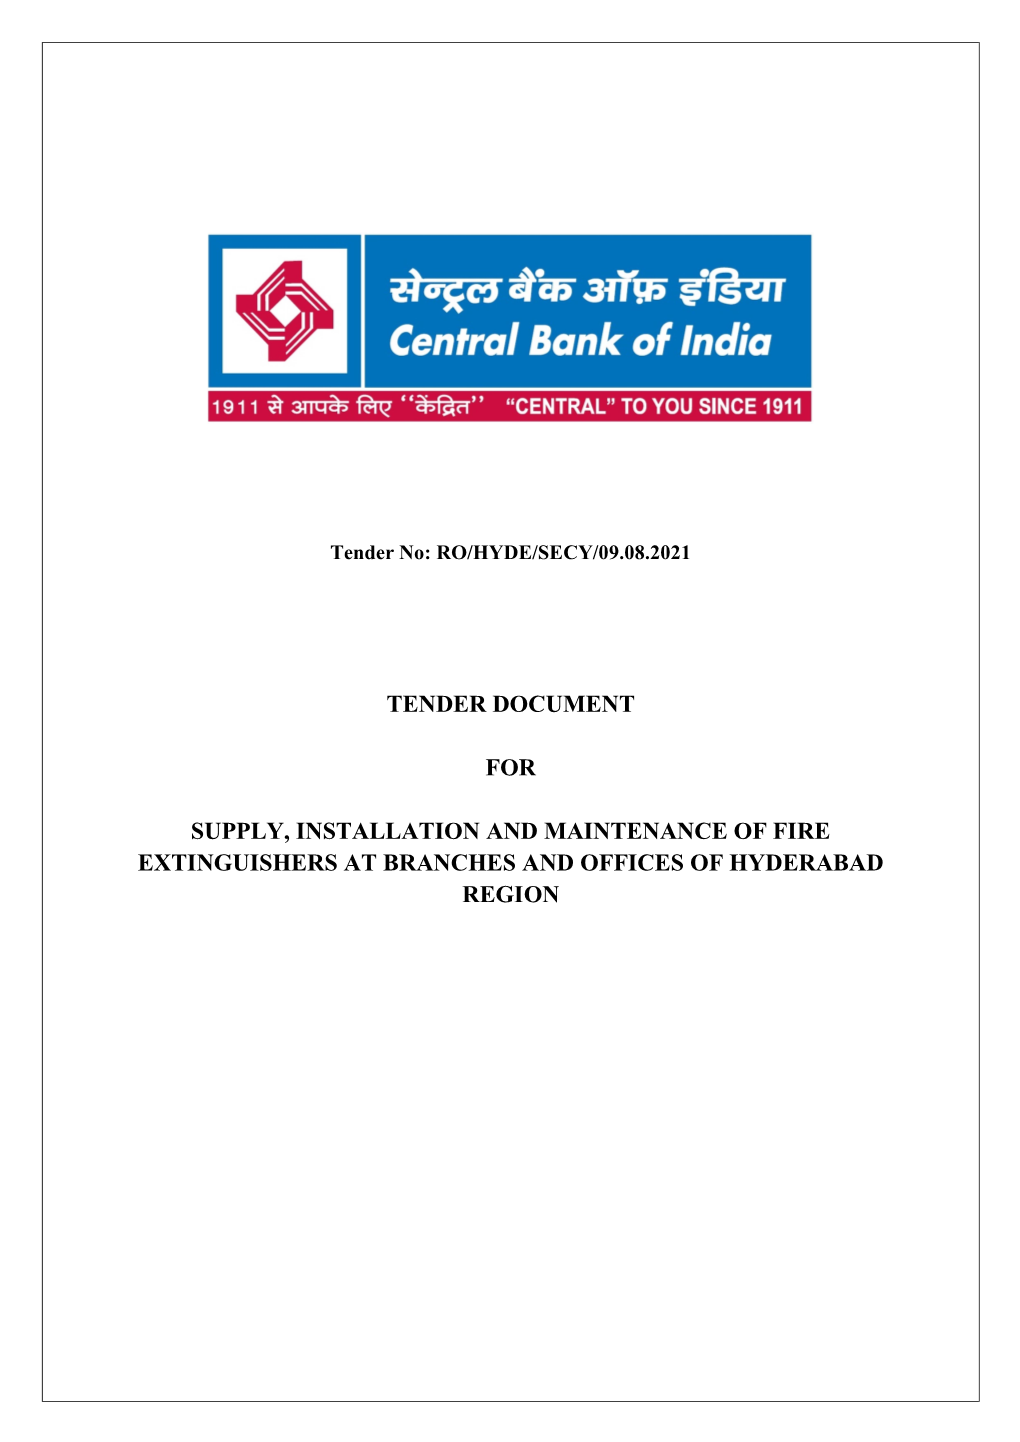 Tender Document for Supply, Installation and Maintenance of Fire